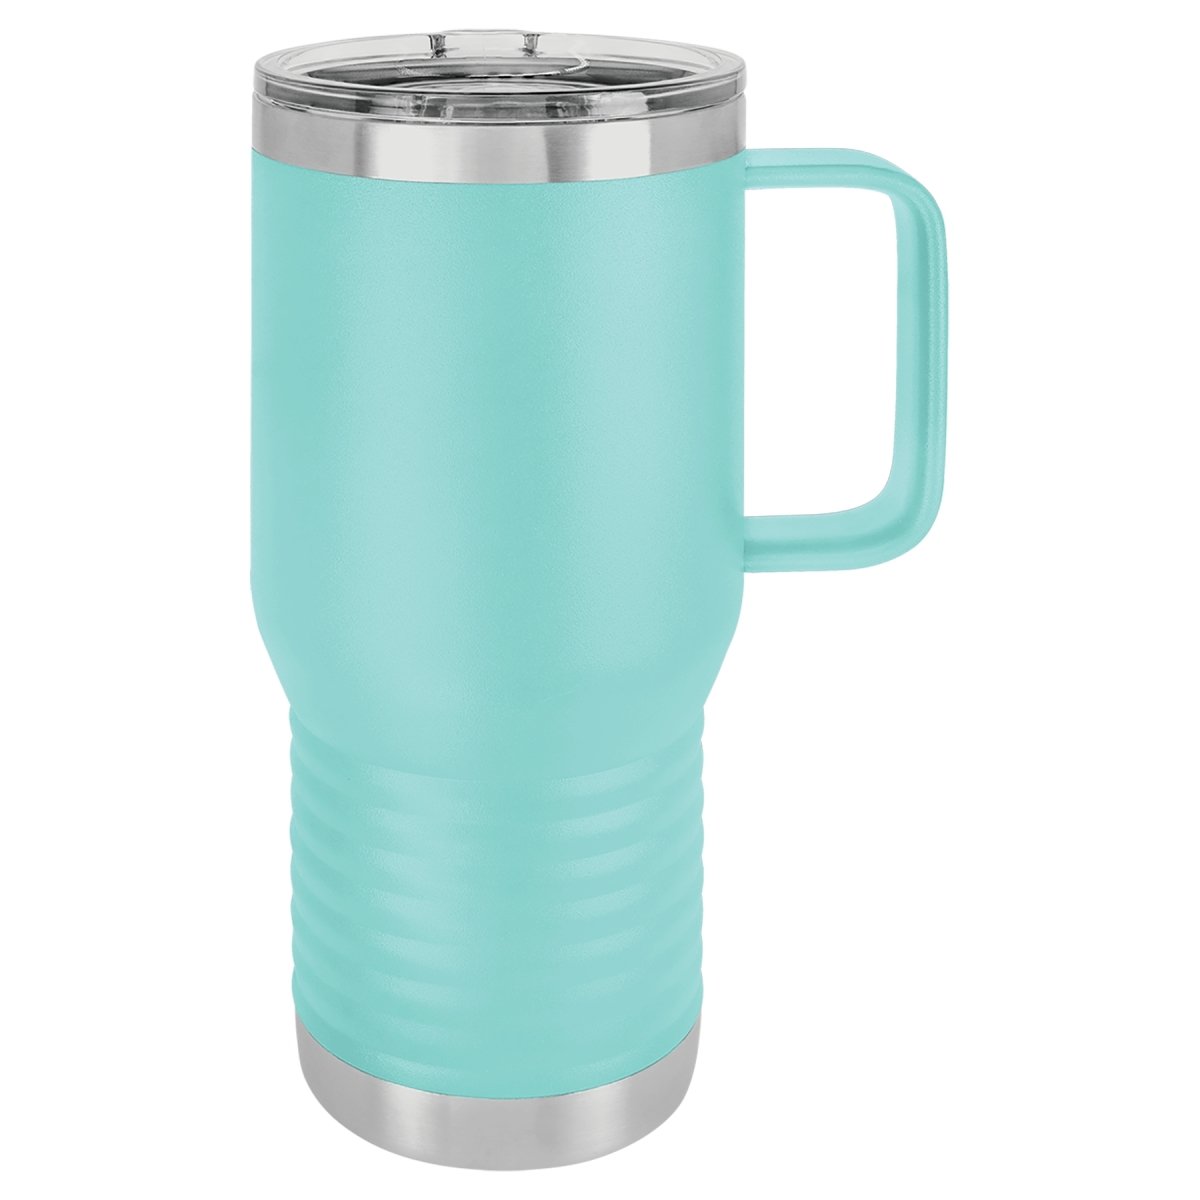 20 oz. Stainless Steel & Powder Coated Travel Mugs with Lid - The Luua Company